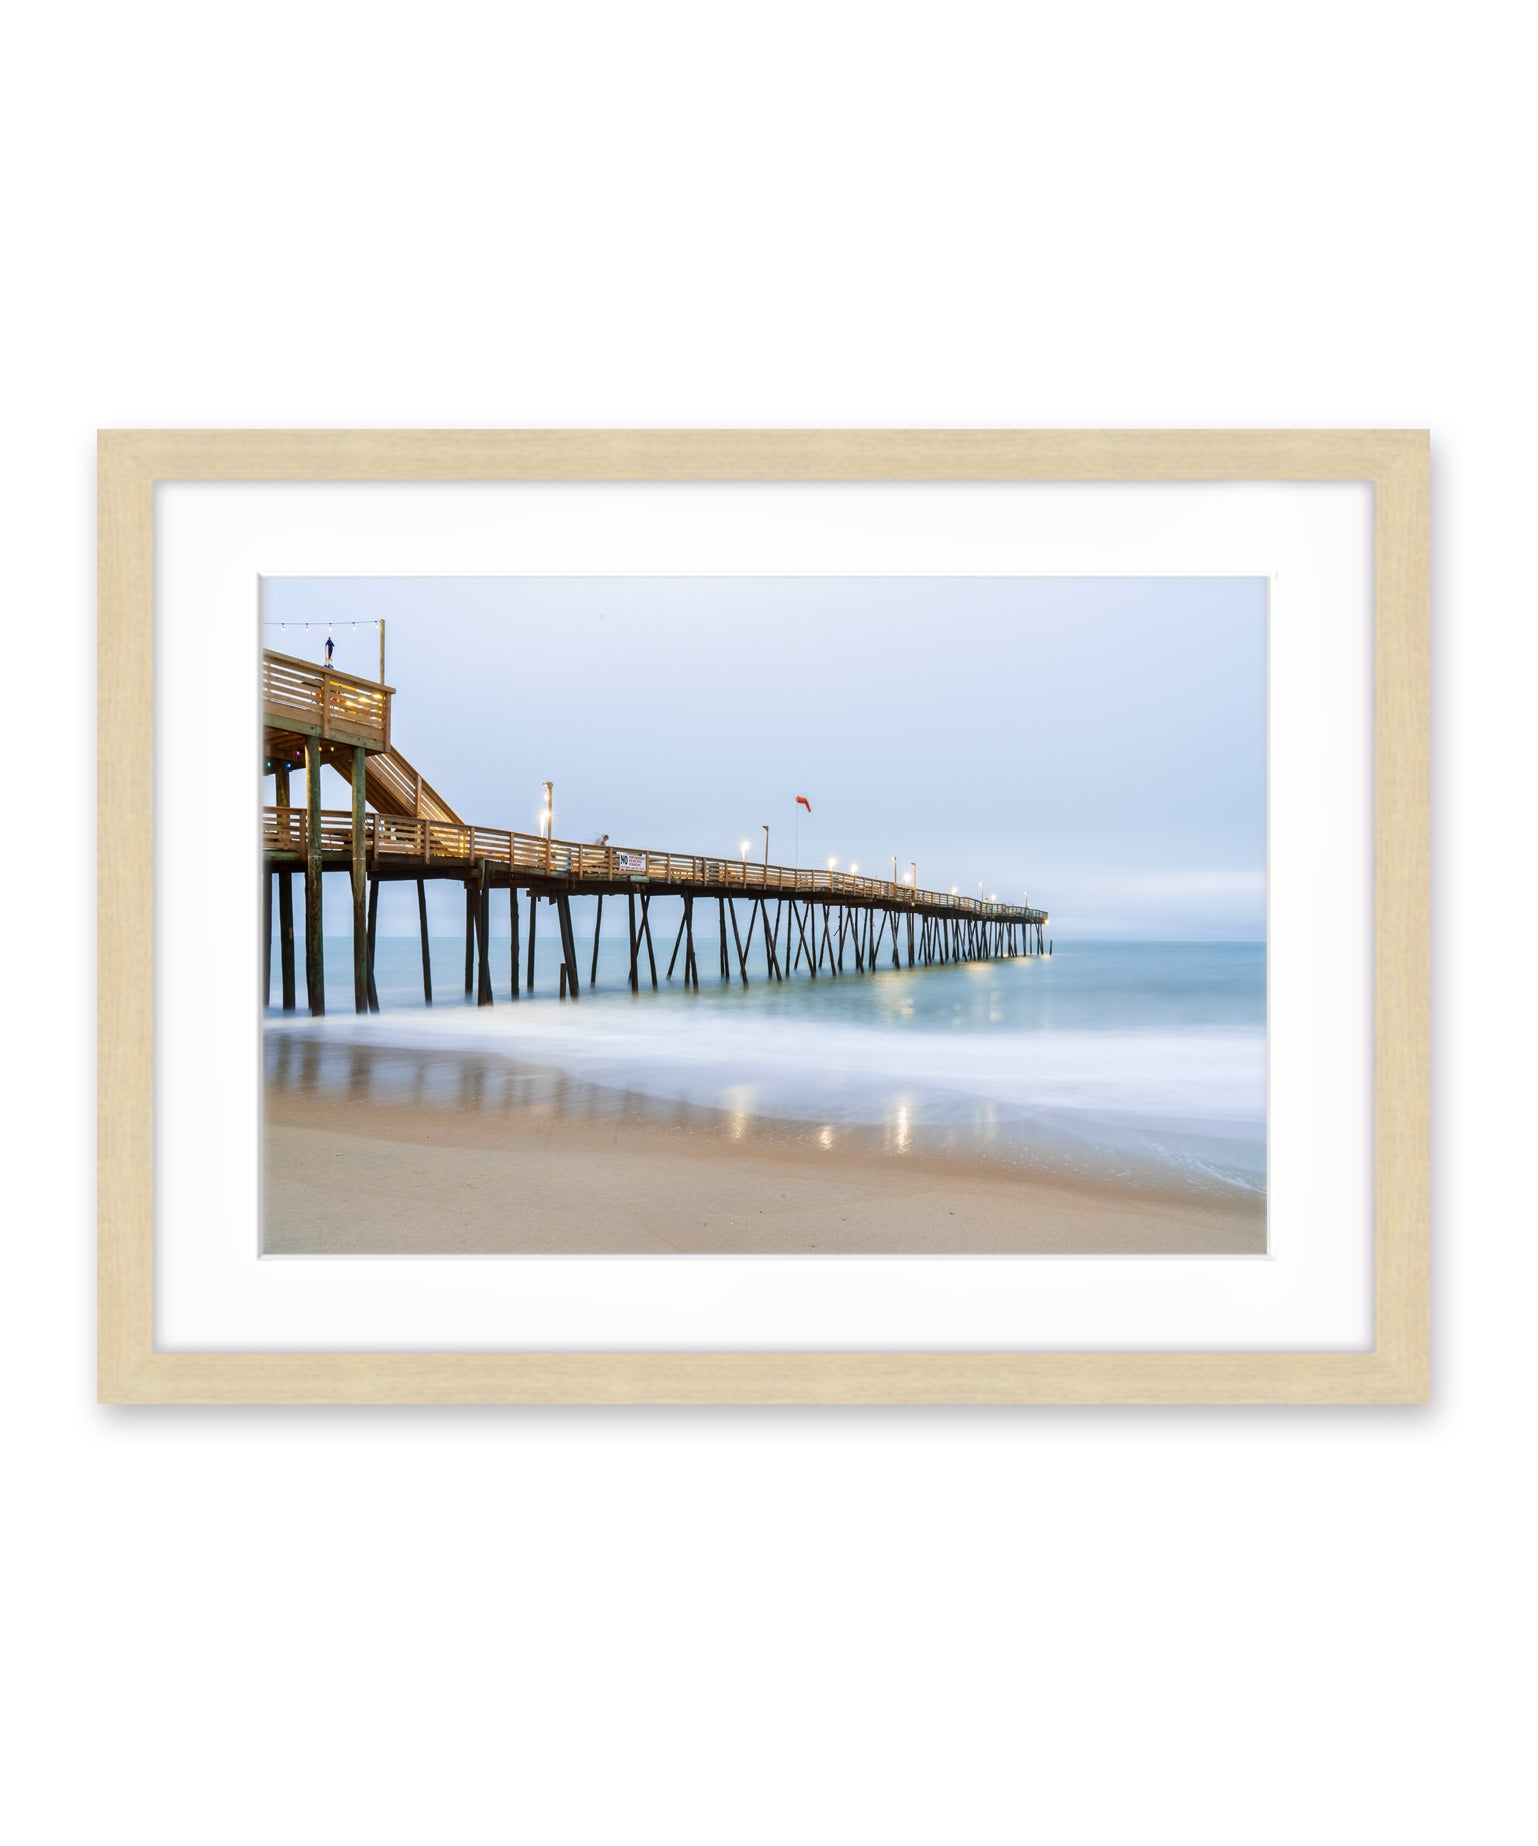 outer banks, avalon pier, blue beach wall art photograph by Wright and Roam, Wood frame